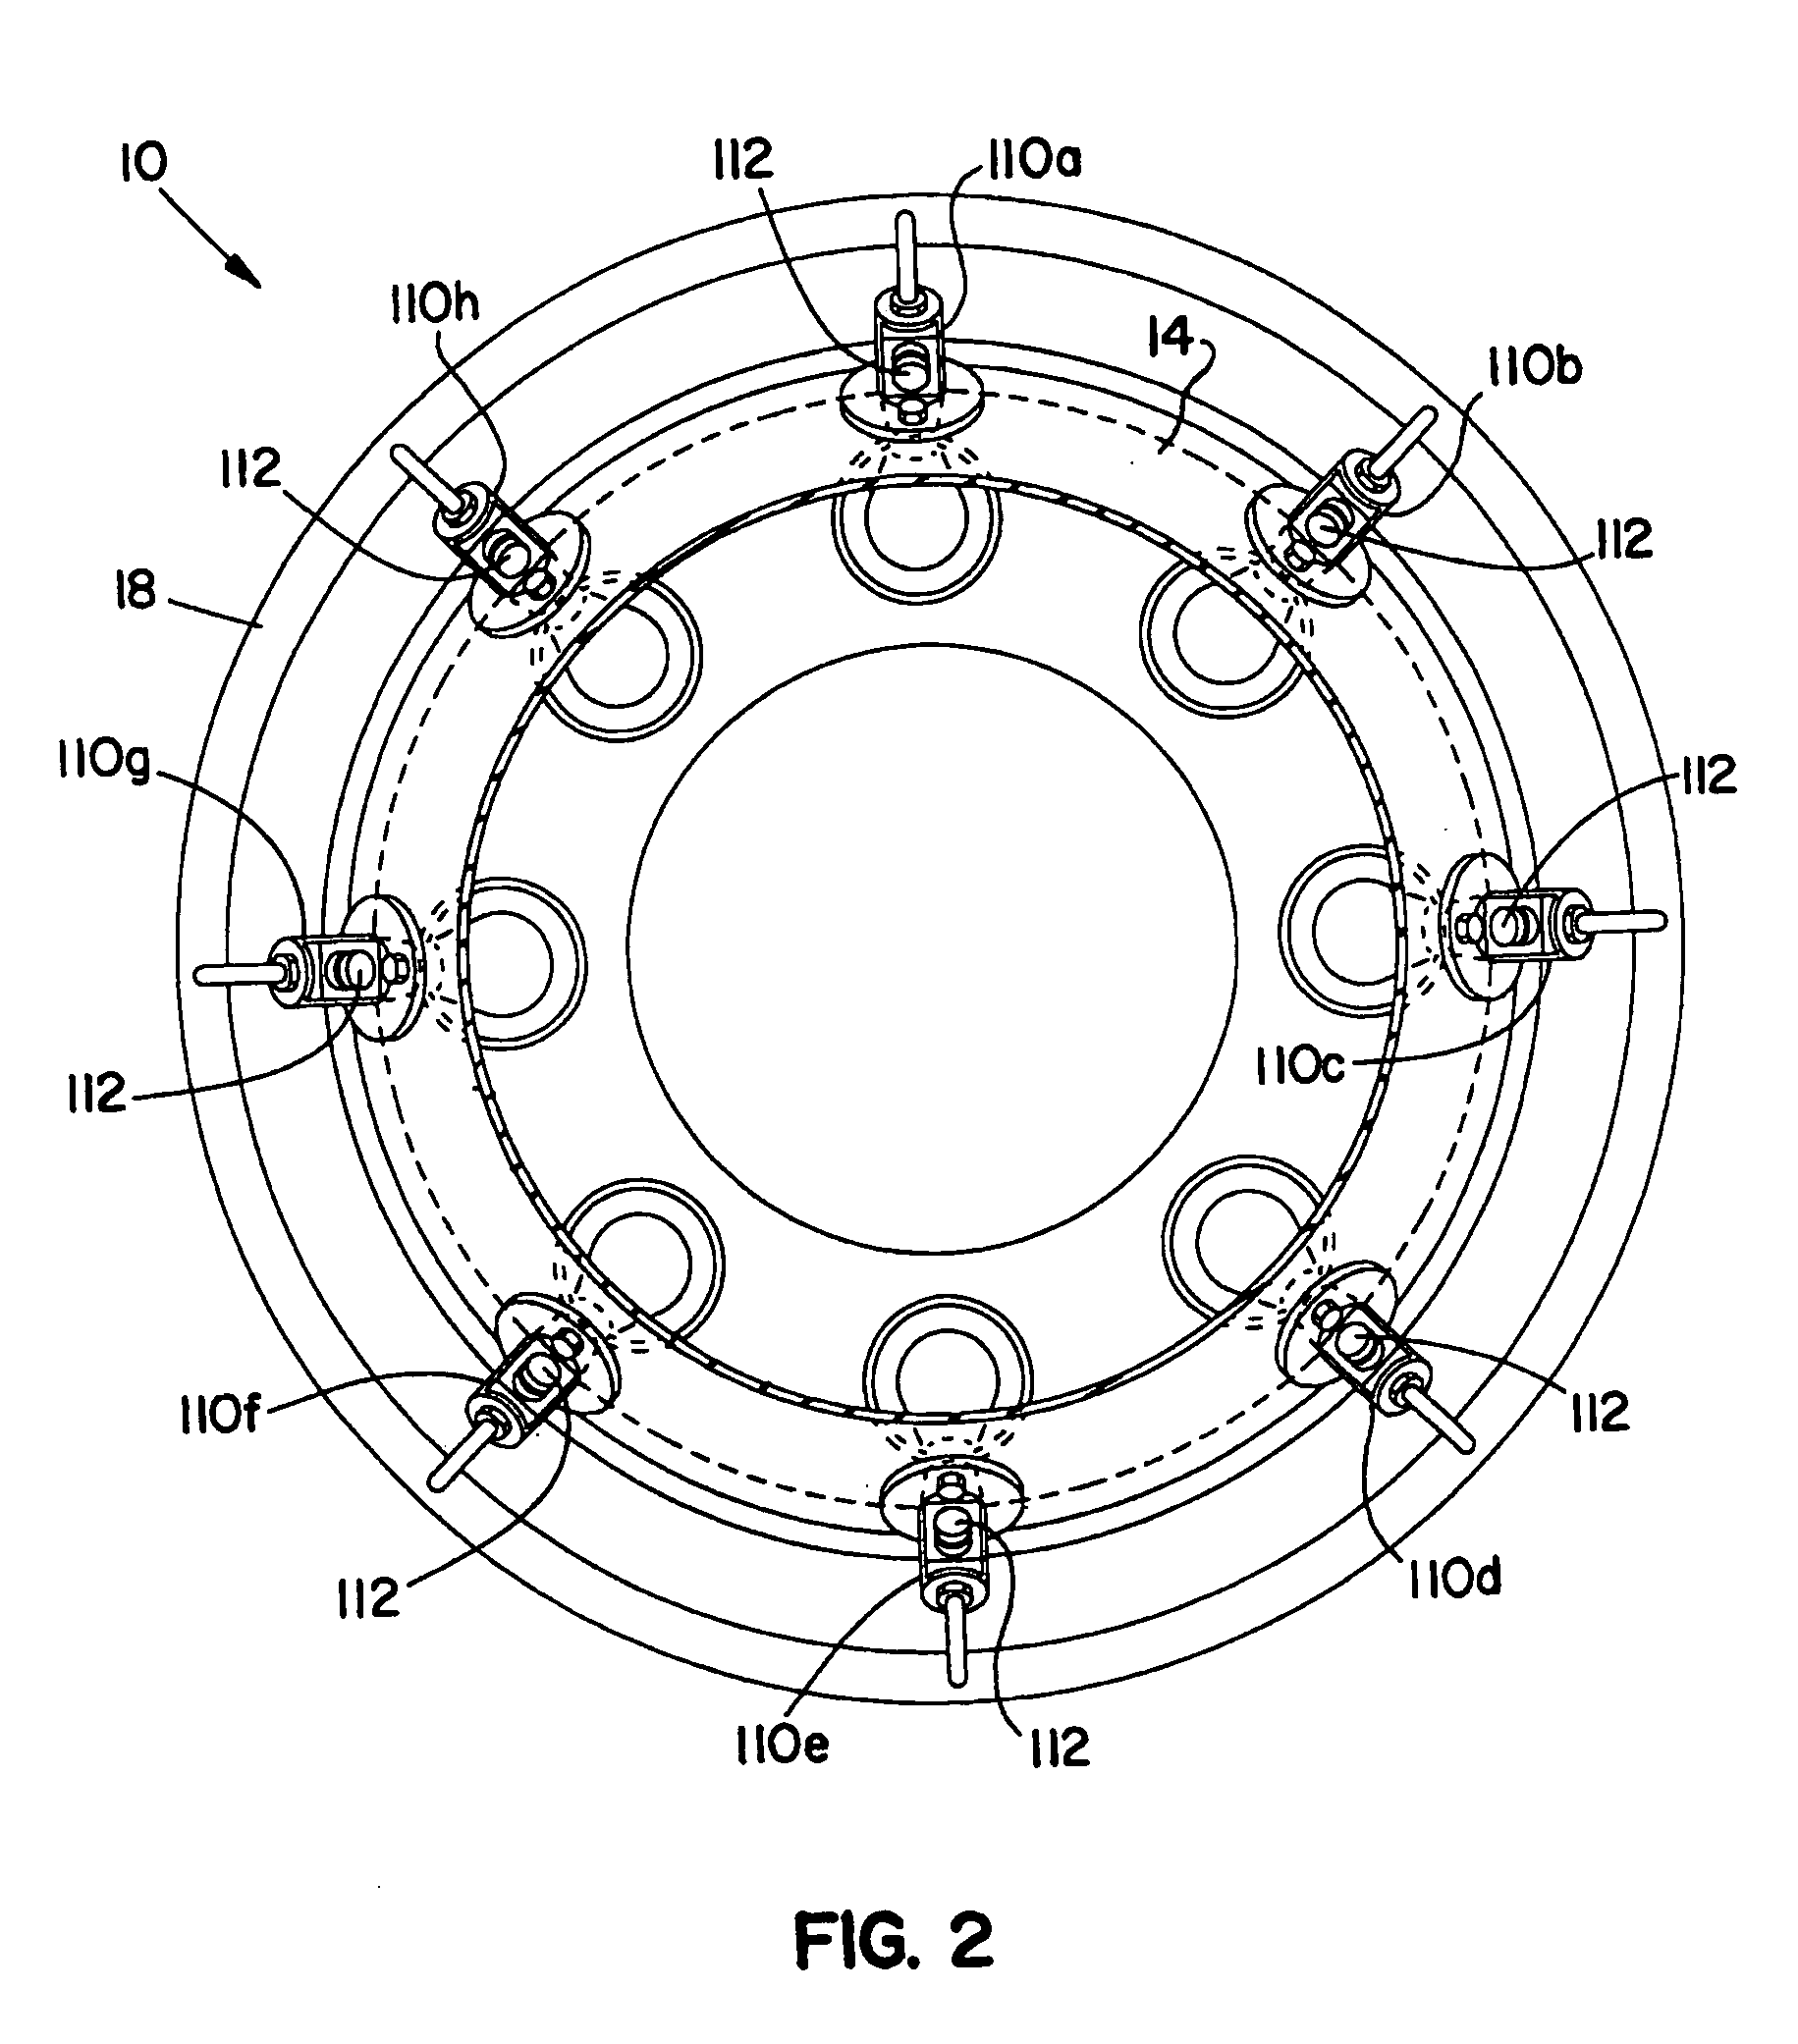 Active combustion control system for gas turbine engines